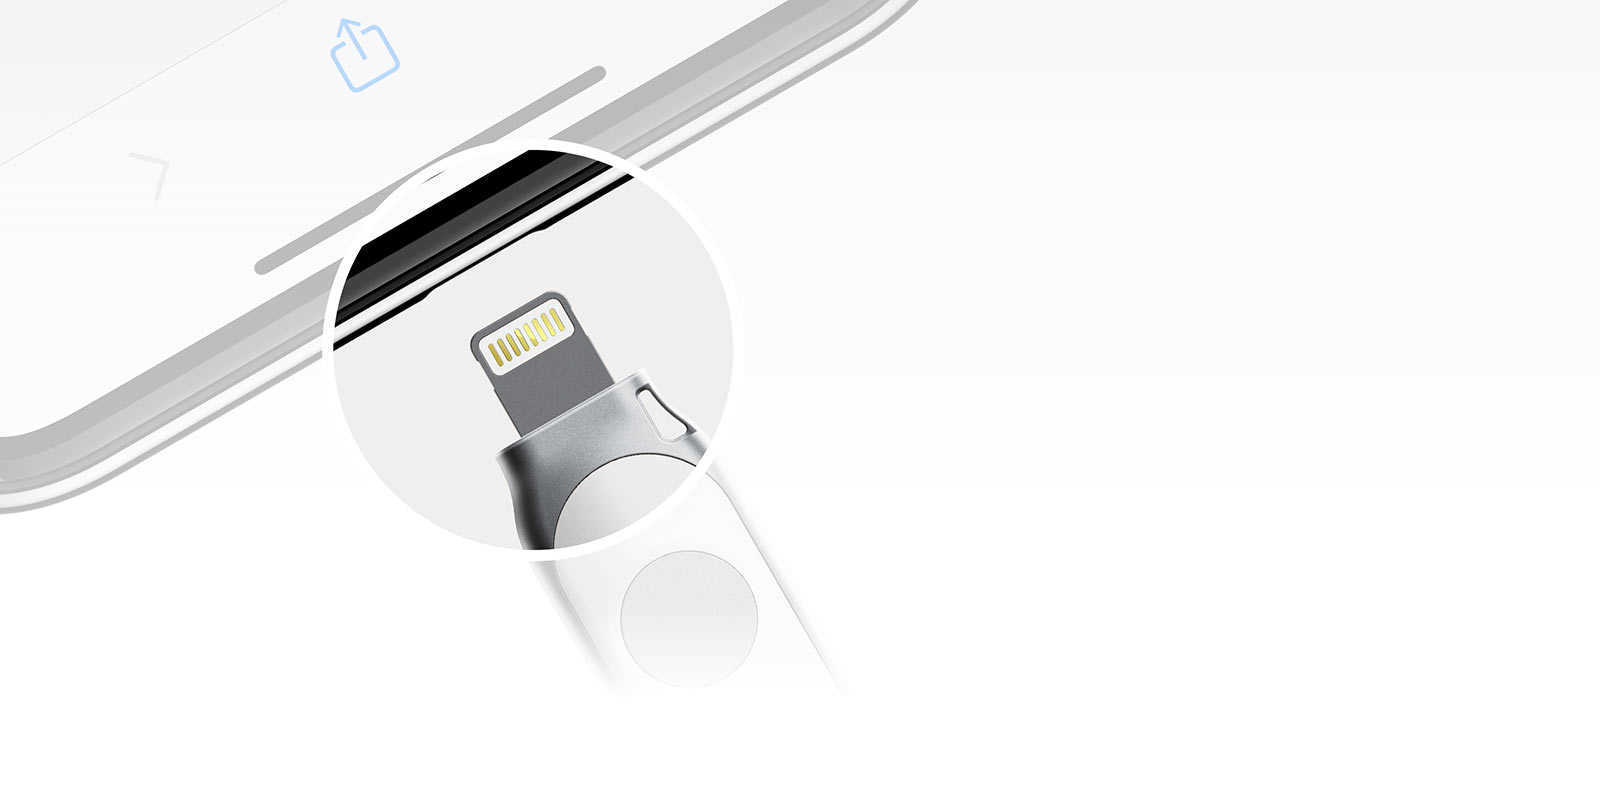 MFi Certified iePass FIDO with built-in Apple Lightning Connector